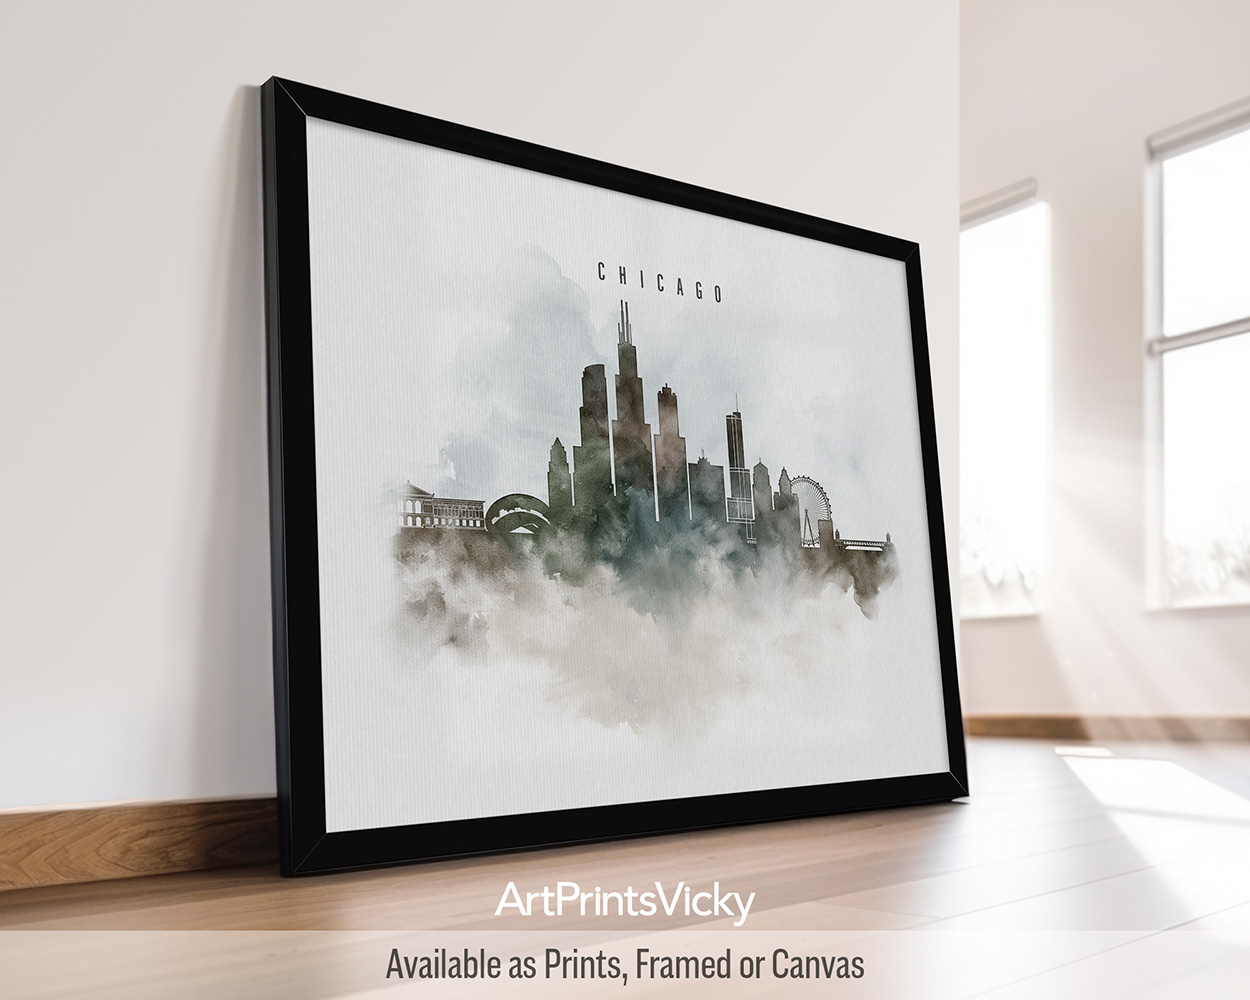 Minimalist Chicago cityscape art print featuring the Willis Tower, and iconic landmarks in a soft watercolor painting style, by ArtPrintsVicky.